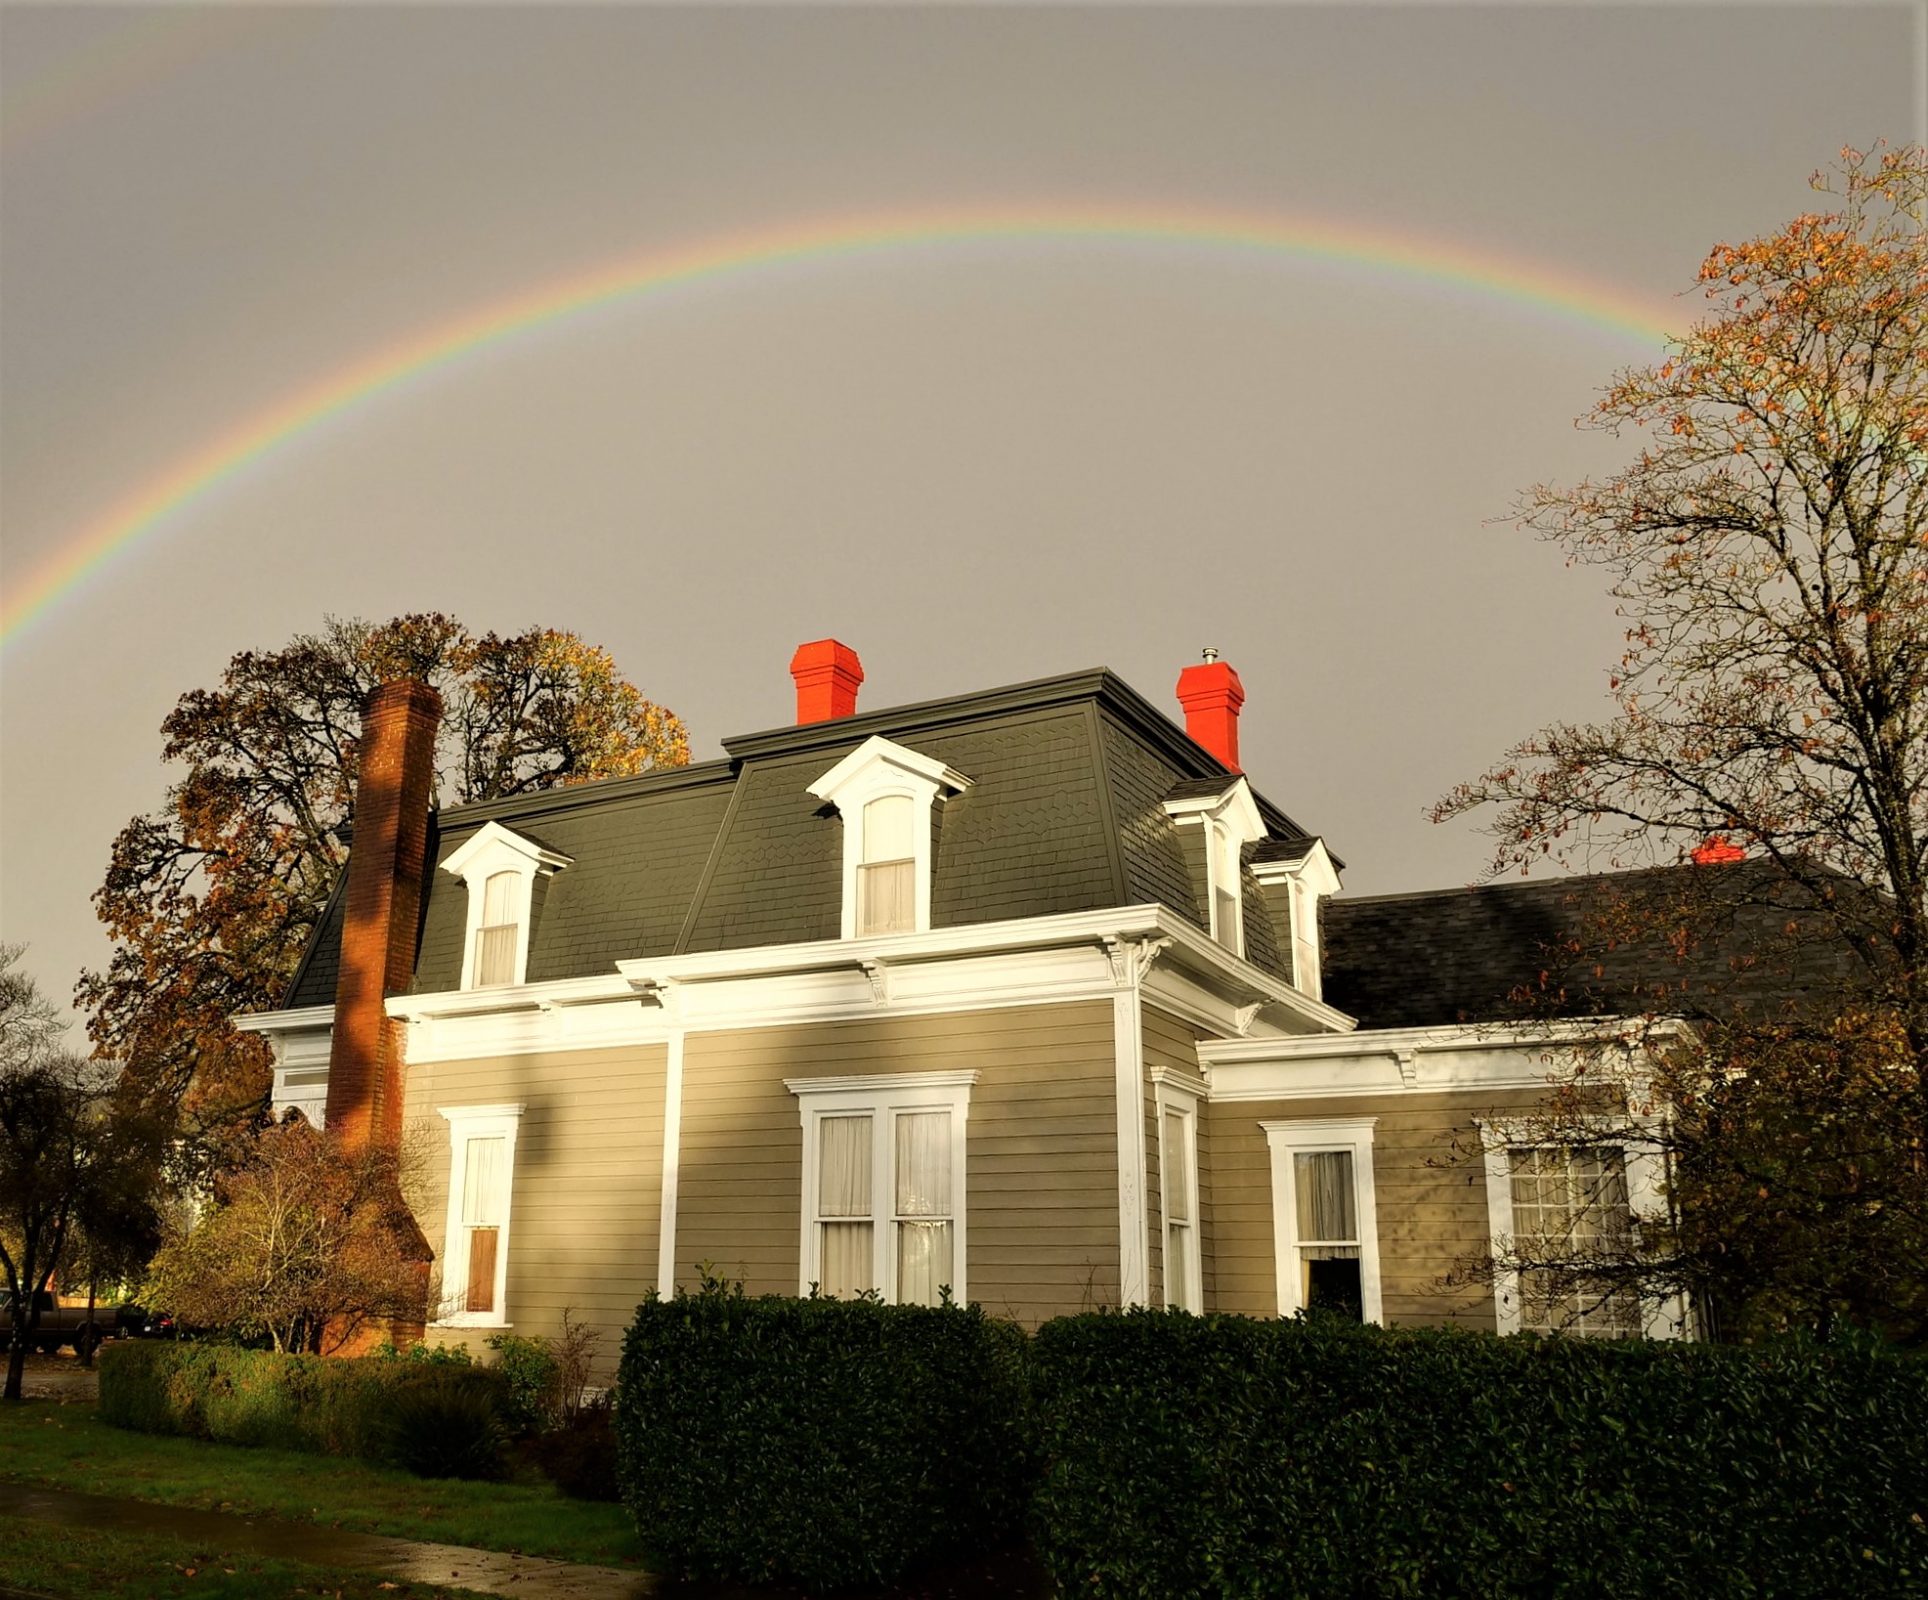 photo of rainbow over histotic home in Albany, Or by Camron Settlemier